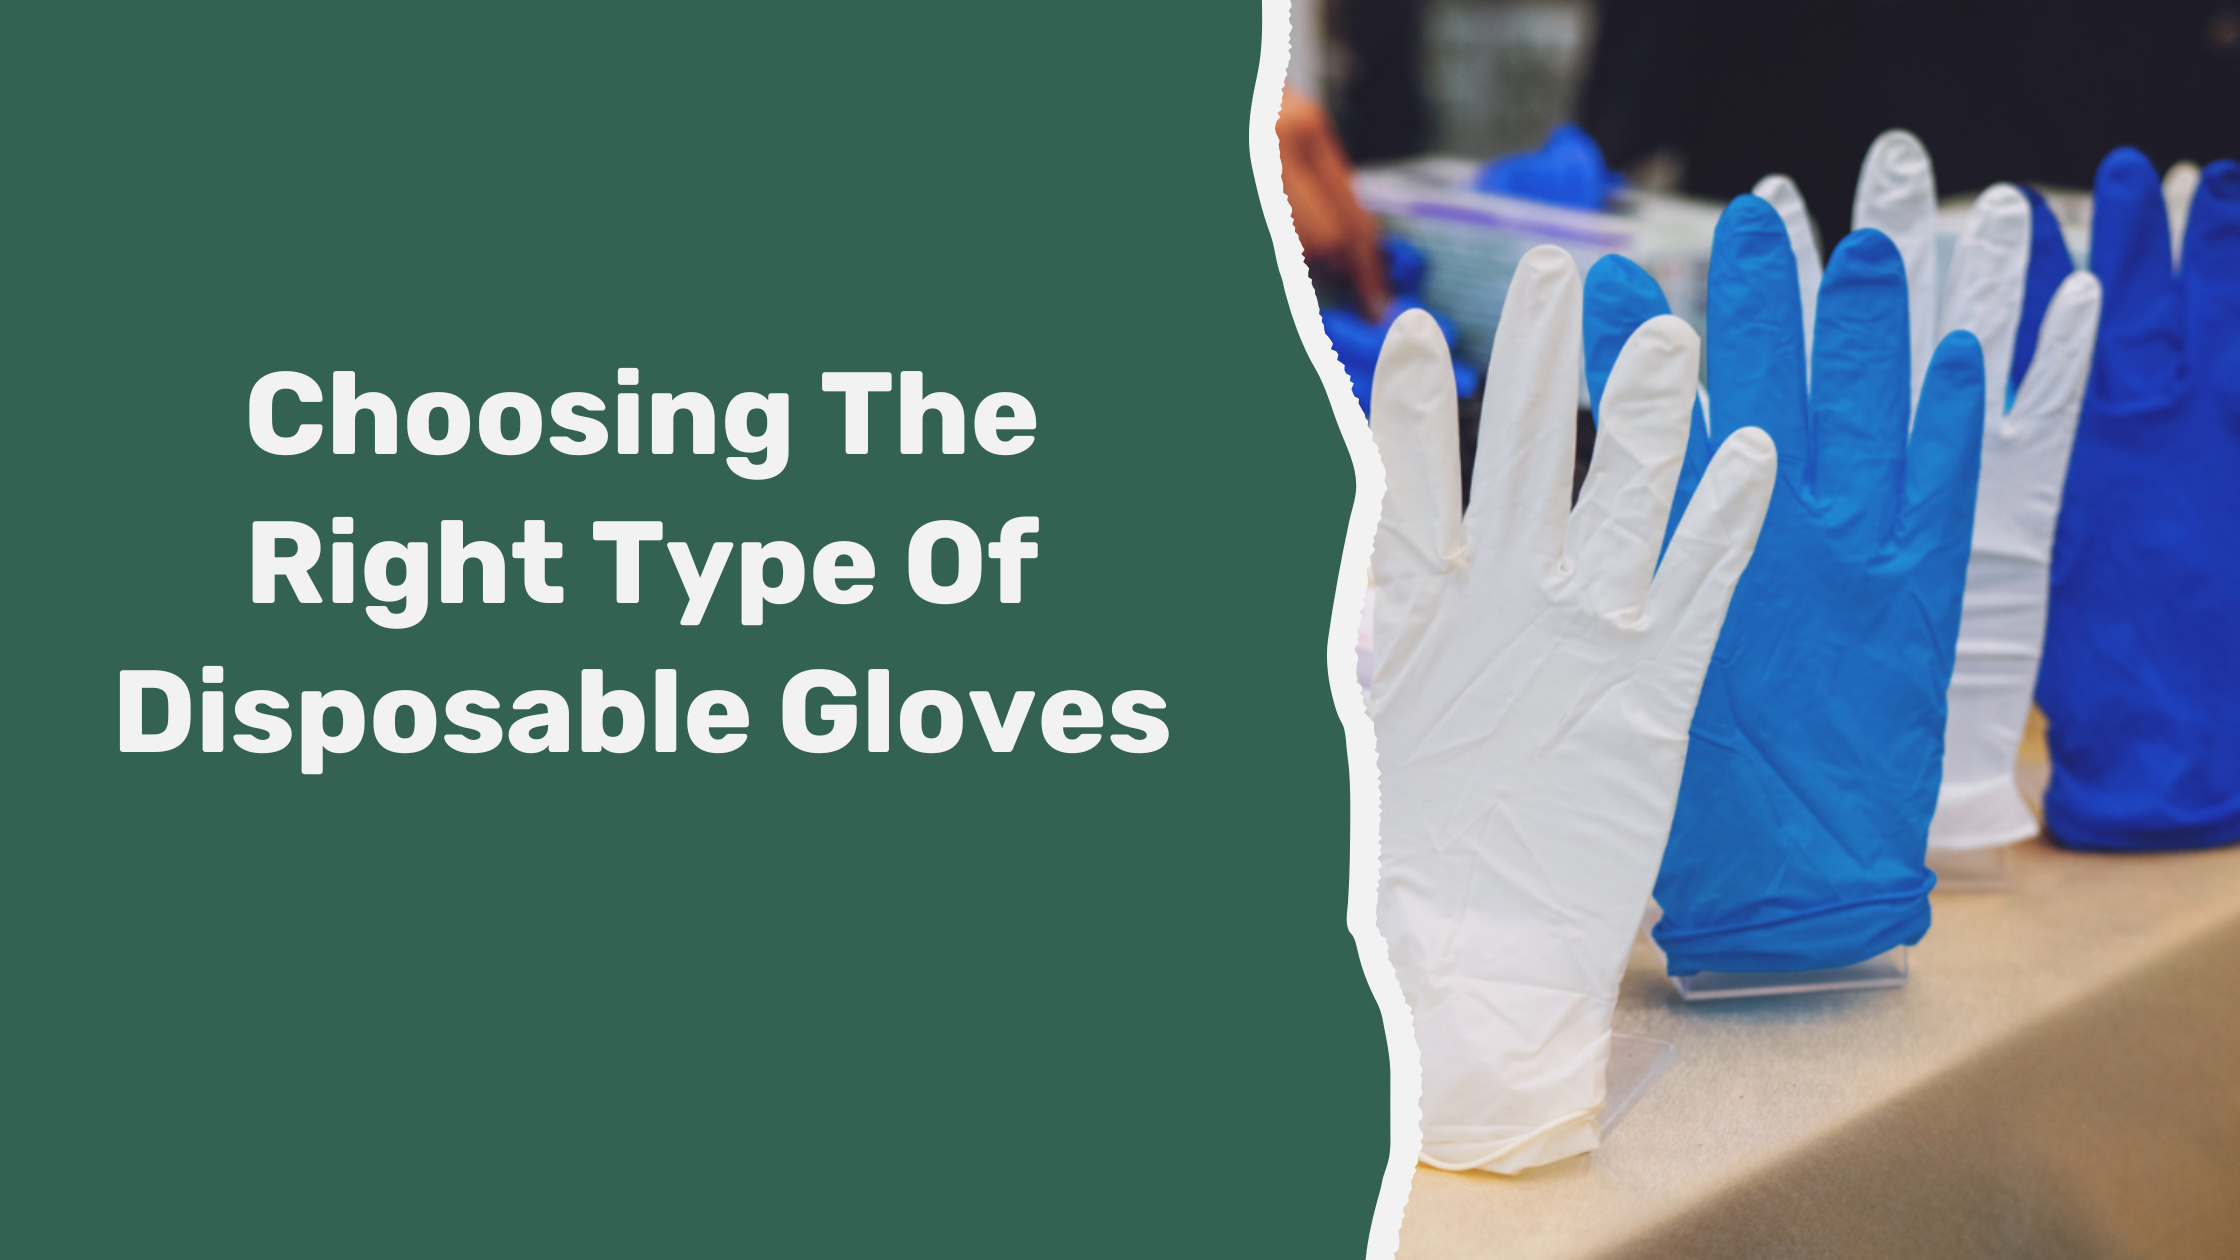 How to Choose the Right Type of Disposable Gloves